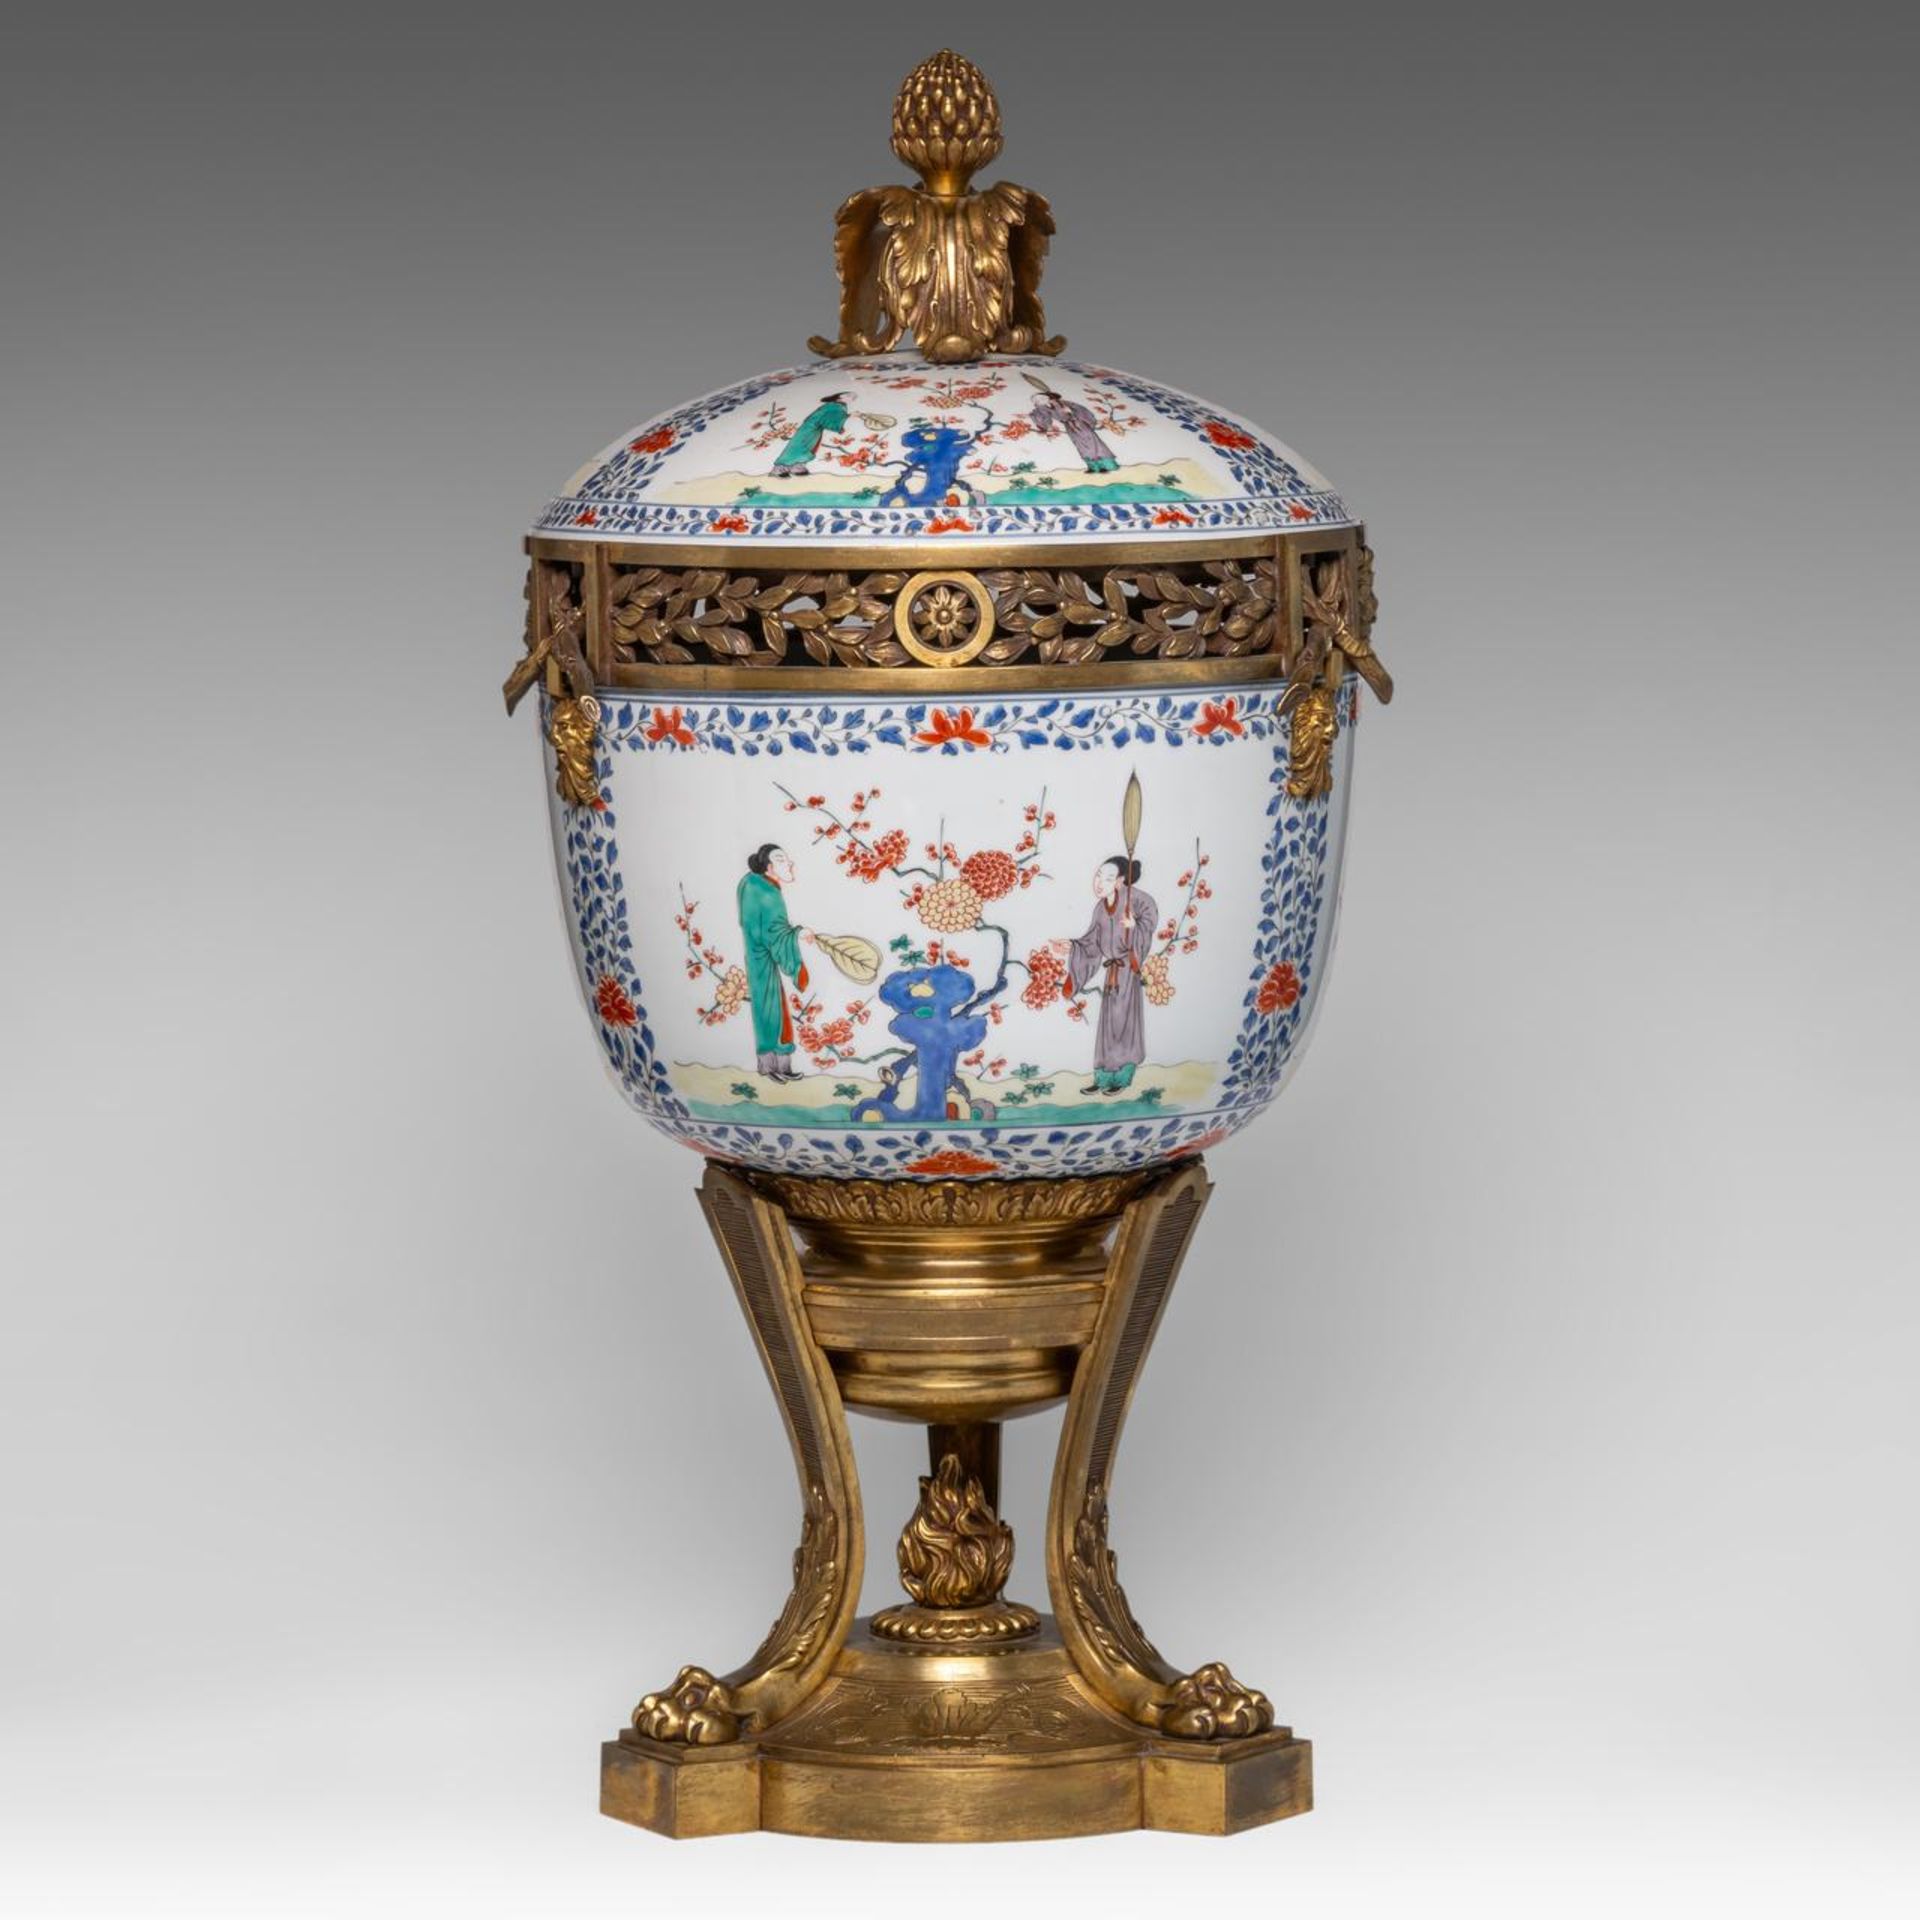 A Kakiemon-style tureen and cover, impressively mounted, late 18thC, total H 66 cm